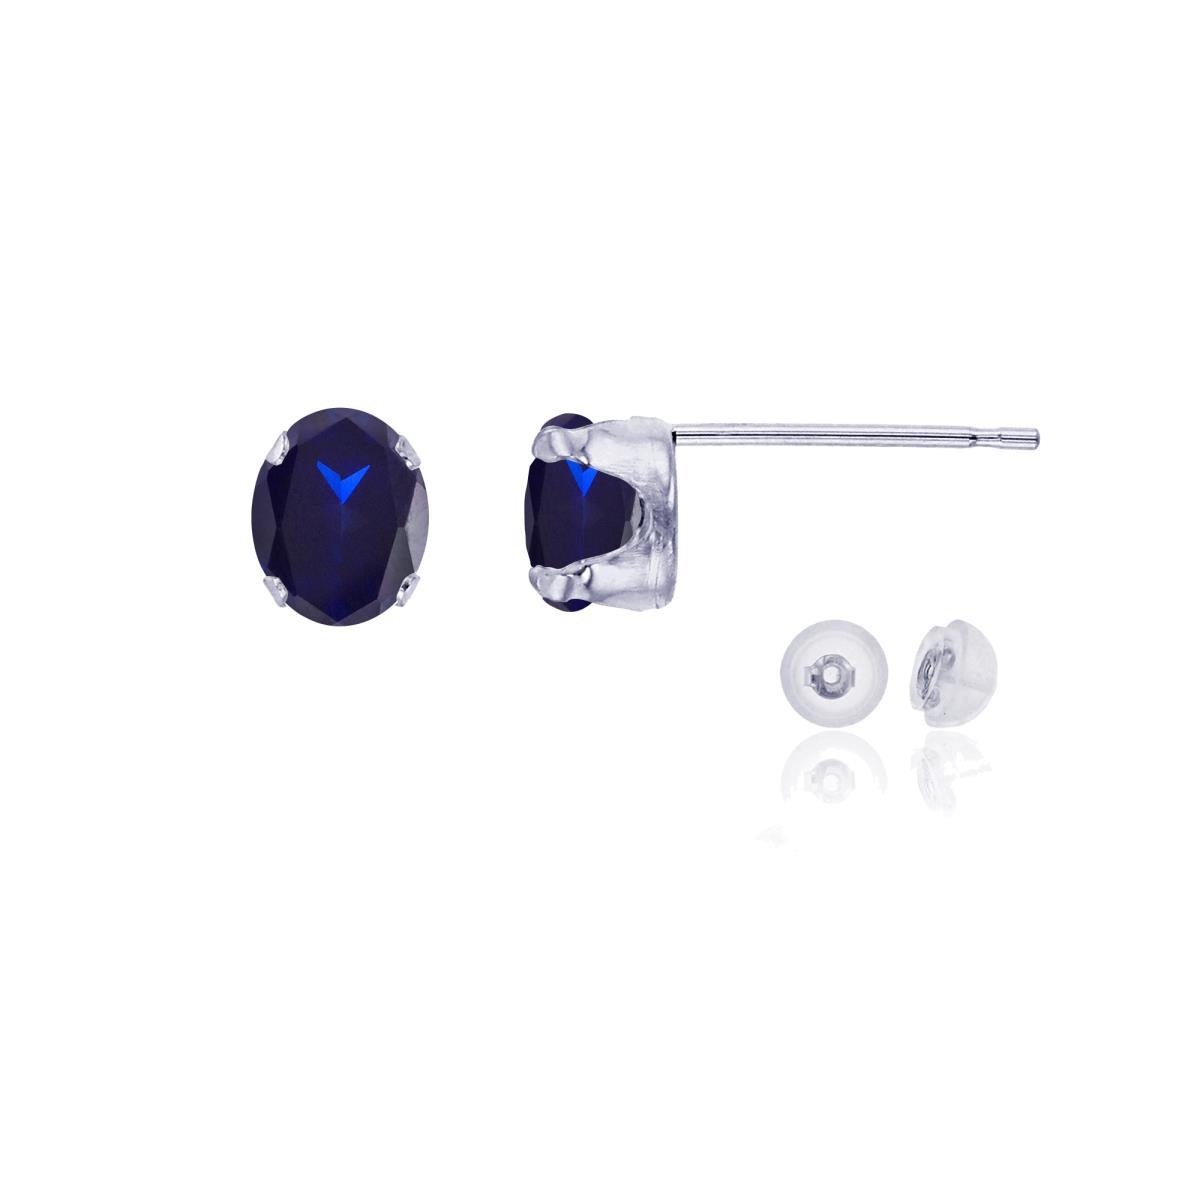 10K White Gold 6x4mm Oval Sapphire Stud Earring with Silicone Back